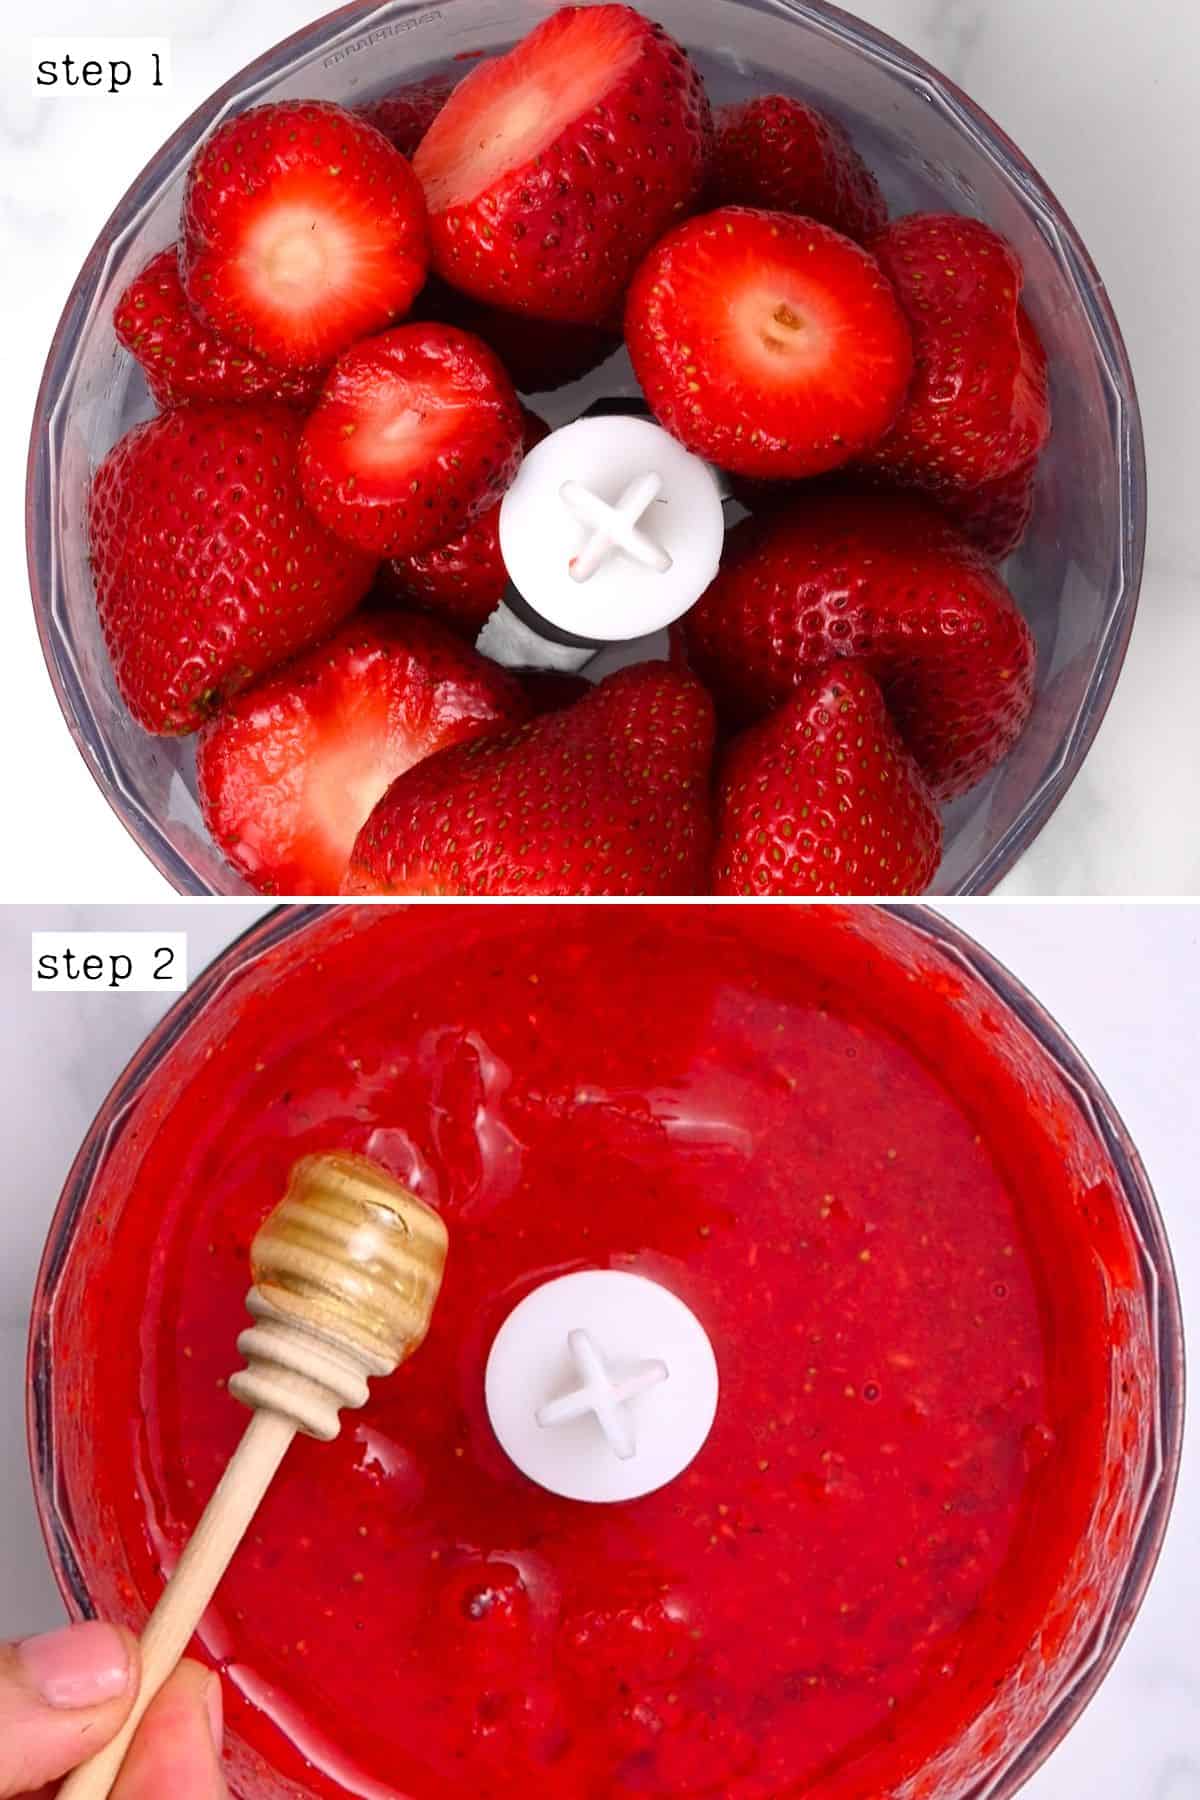 https://www.alphafoodie.com/wp-content/uploads/2022/06/Fruit-Roll-ups-Steps-for-making-strawberry-puree.jpeg